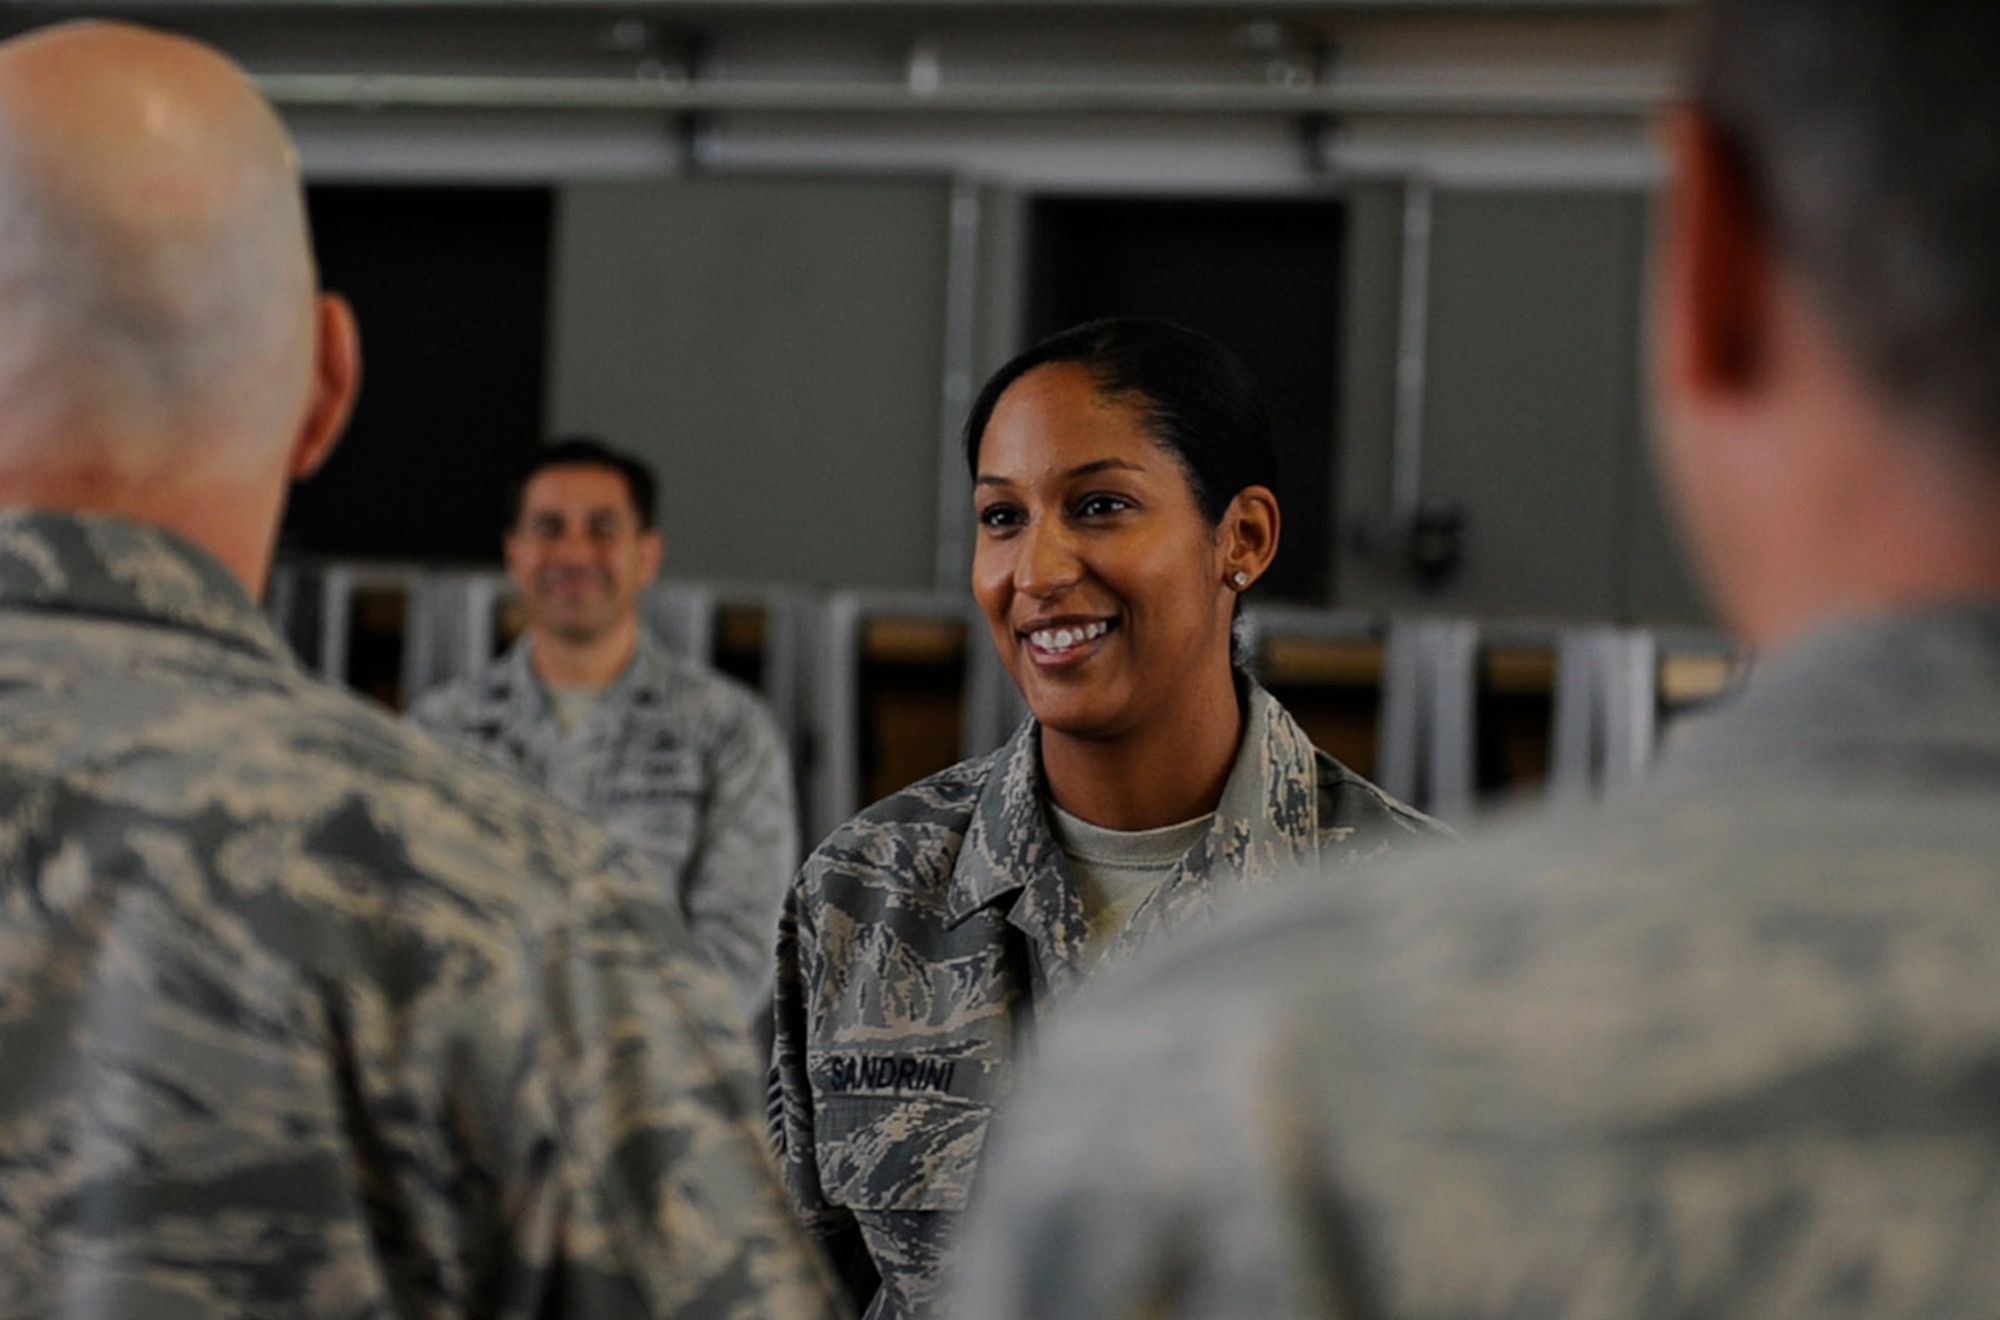 U.S. Air Force Gen. Carlton “Dewey” Everhart II, commander, Air Mobility Command, visits the 521st Air Mobility Operations Wing during his immersion tour on Ramstein Air Base, Germany, Aug. 14, 2017.